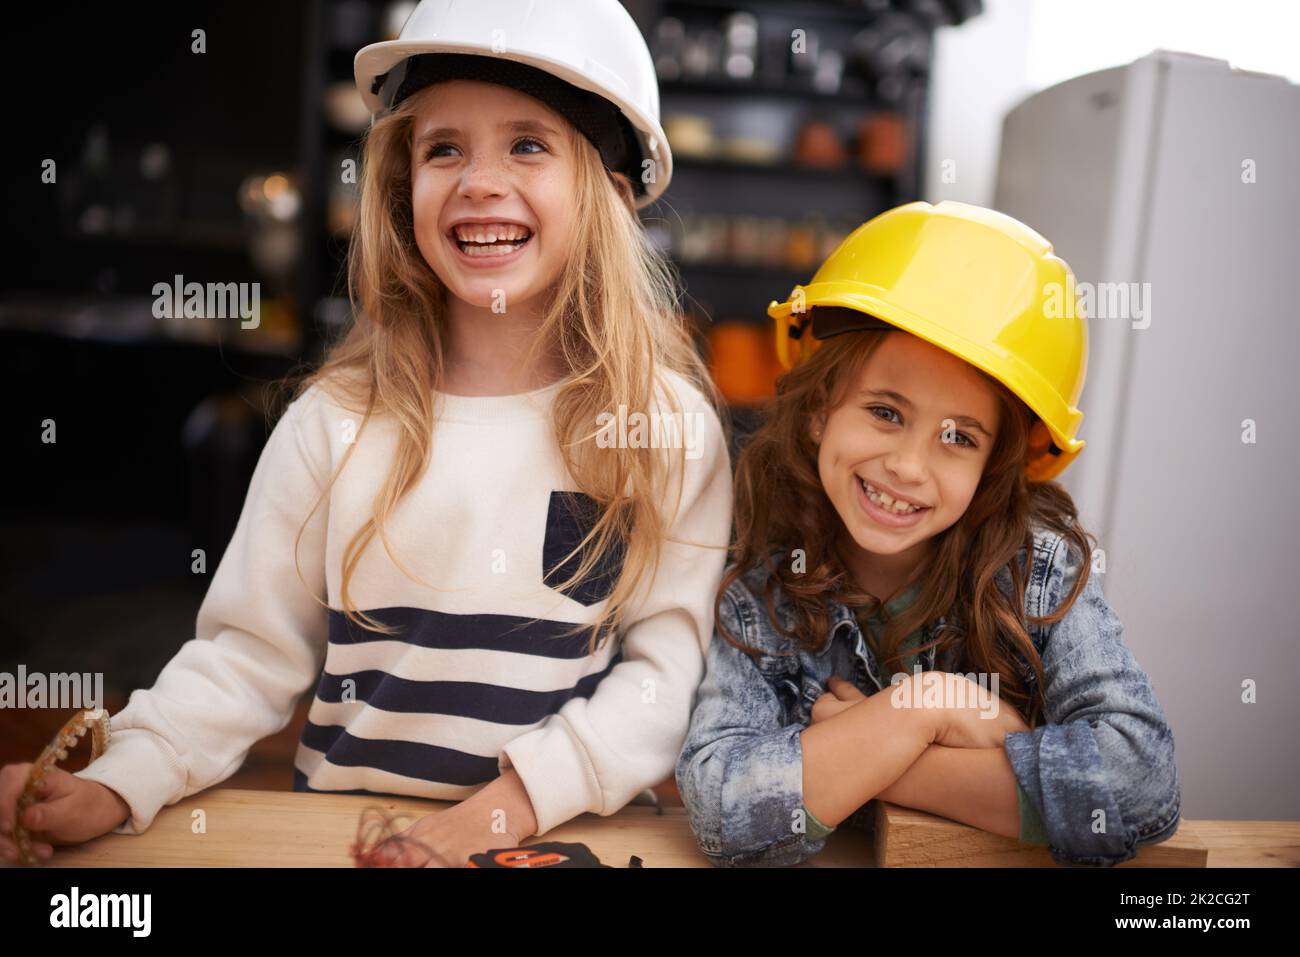 Creating things is so much fun. Shot of two little girls playing around with tools in hard hats. Stock Photo